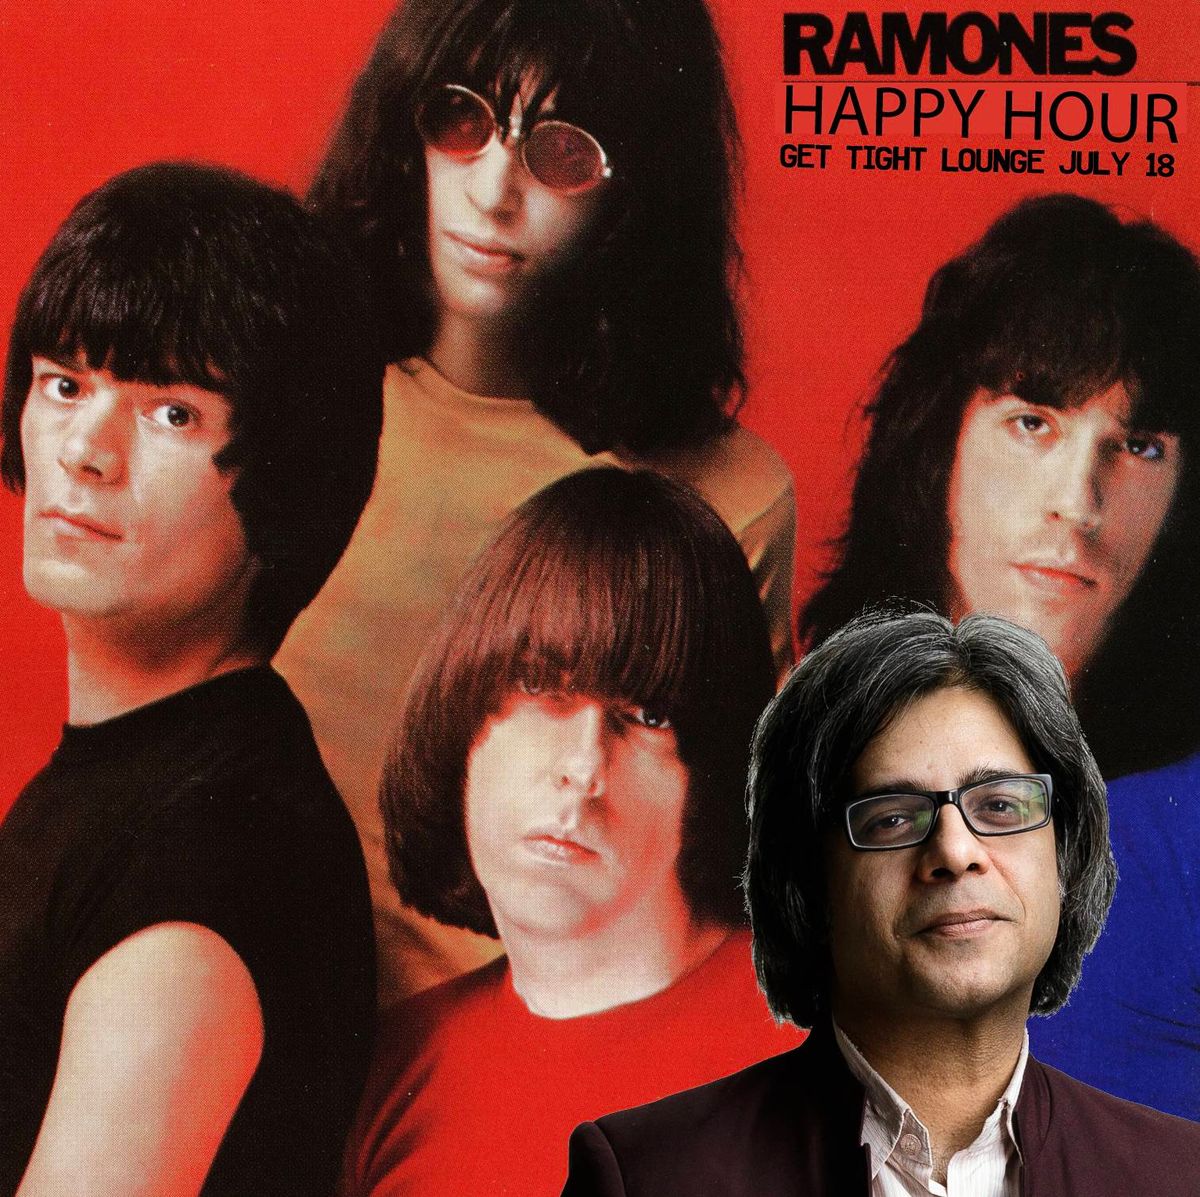 Thurs July 18 Ramones Happy Hour with Prabir at Get Tight Lounge